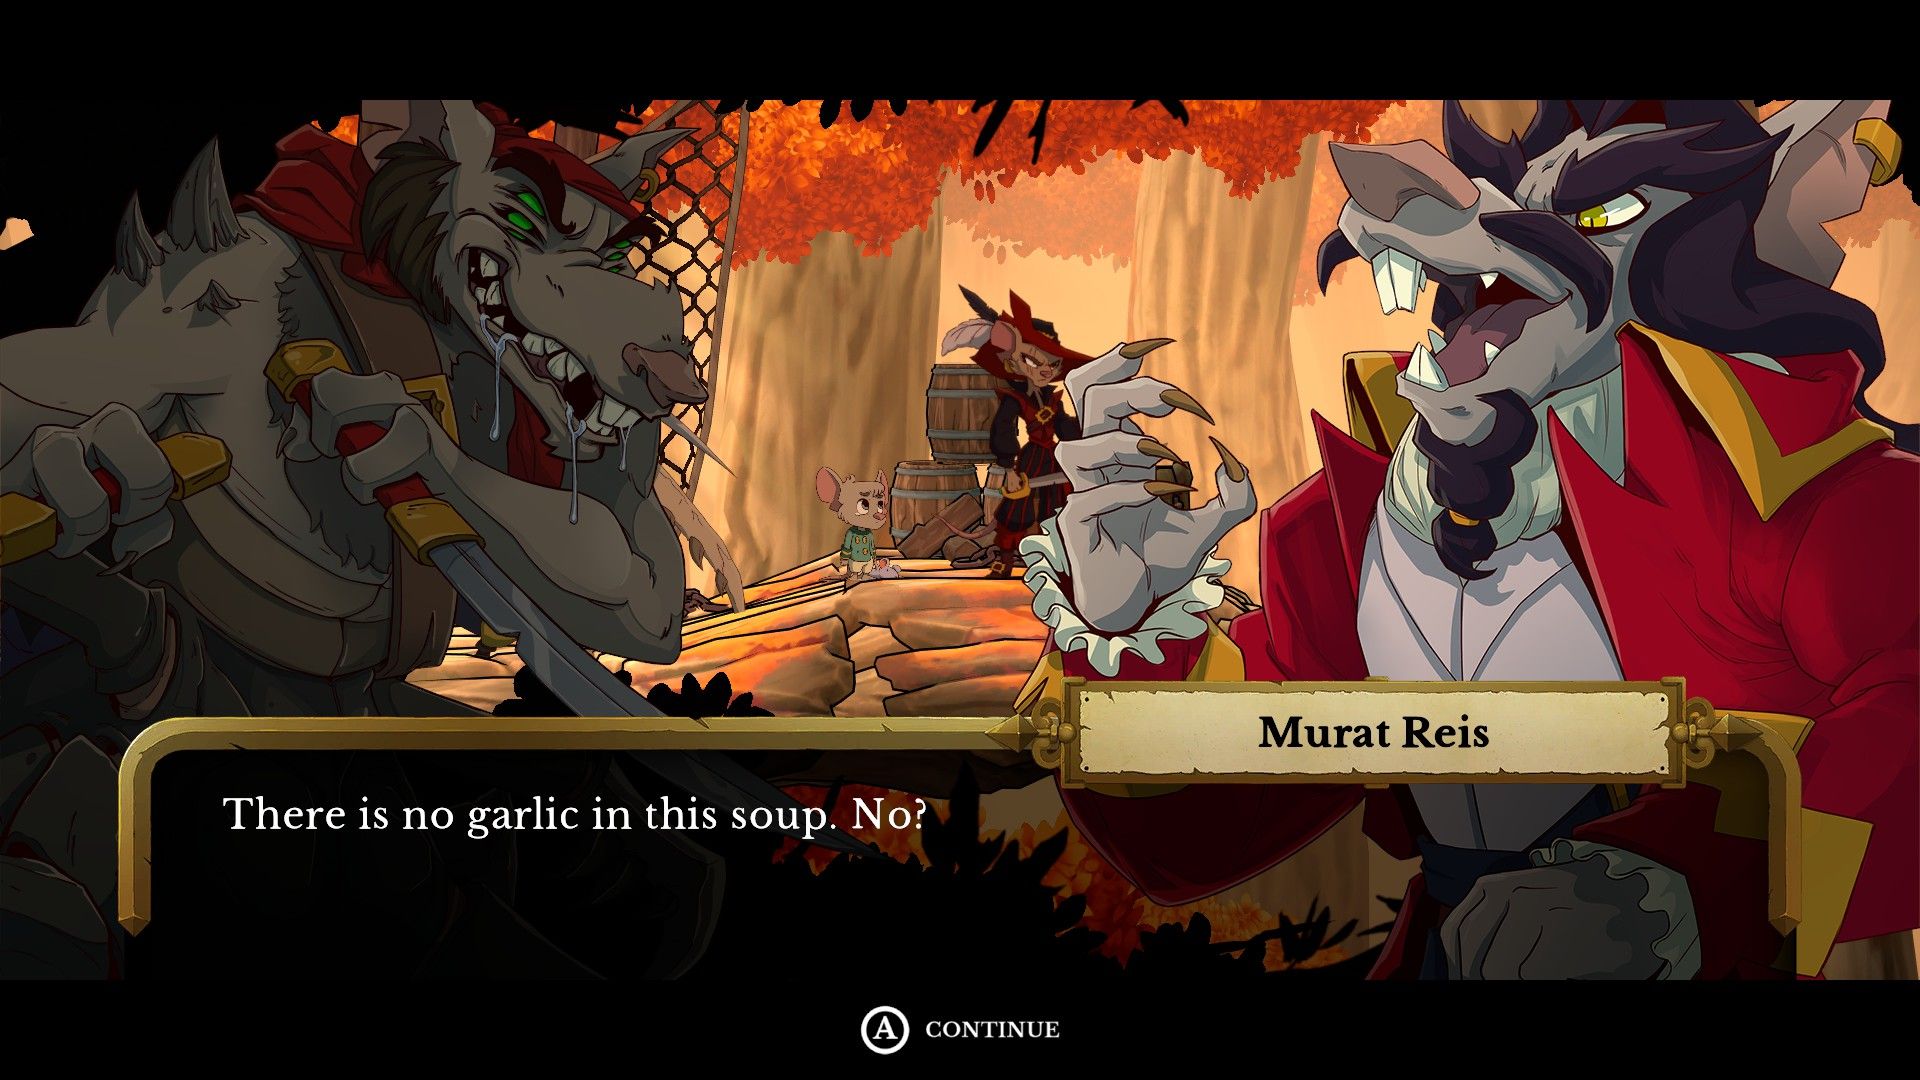 Vampire Murat Reis from Curse of the Sea Rats asks a spider-like rat whether garlic is in the soup.